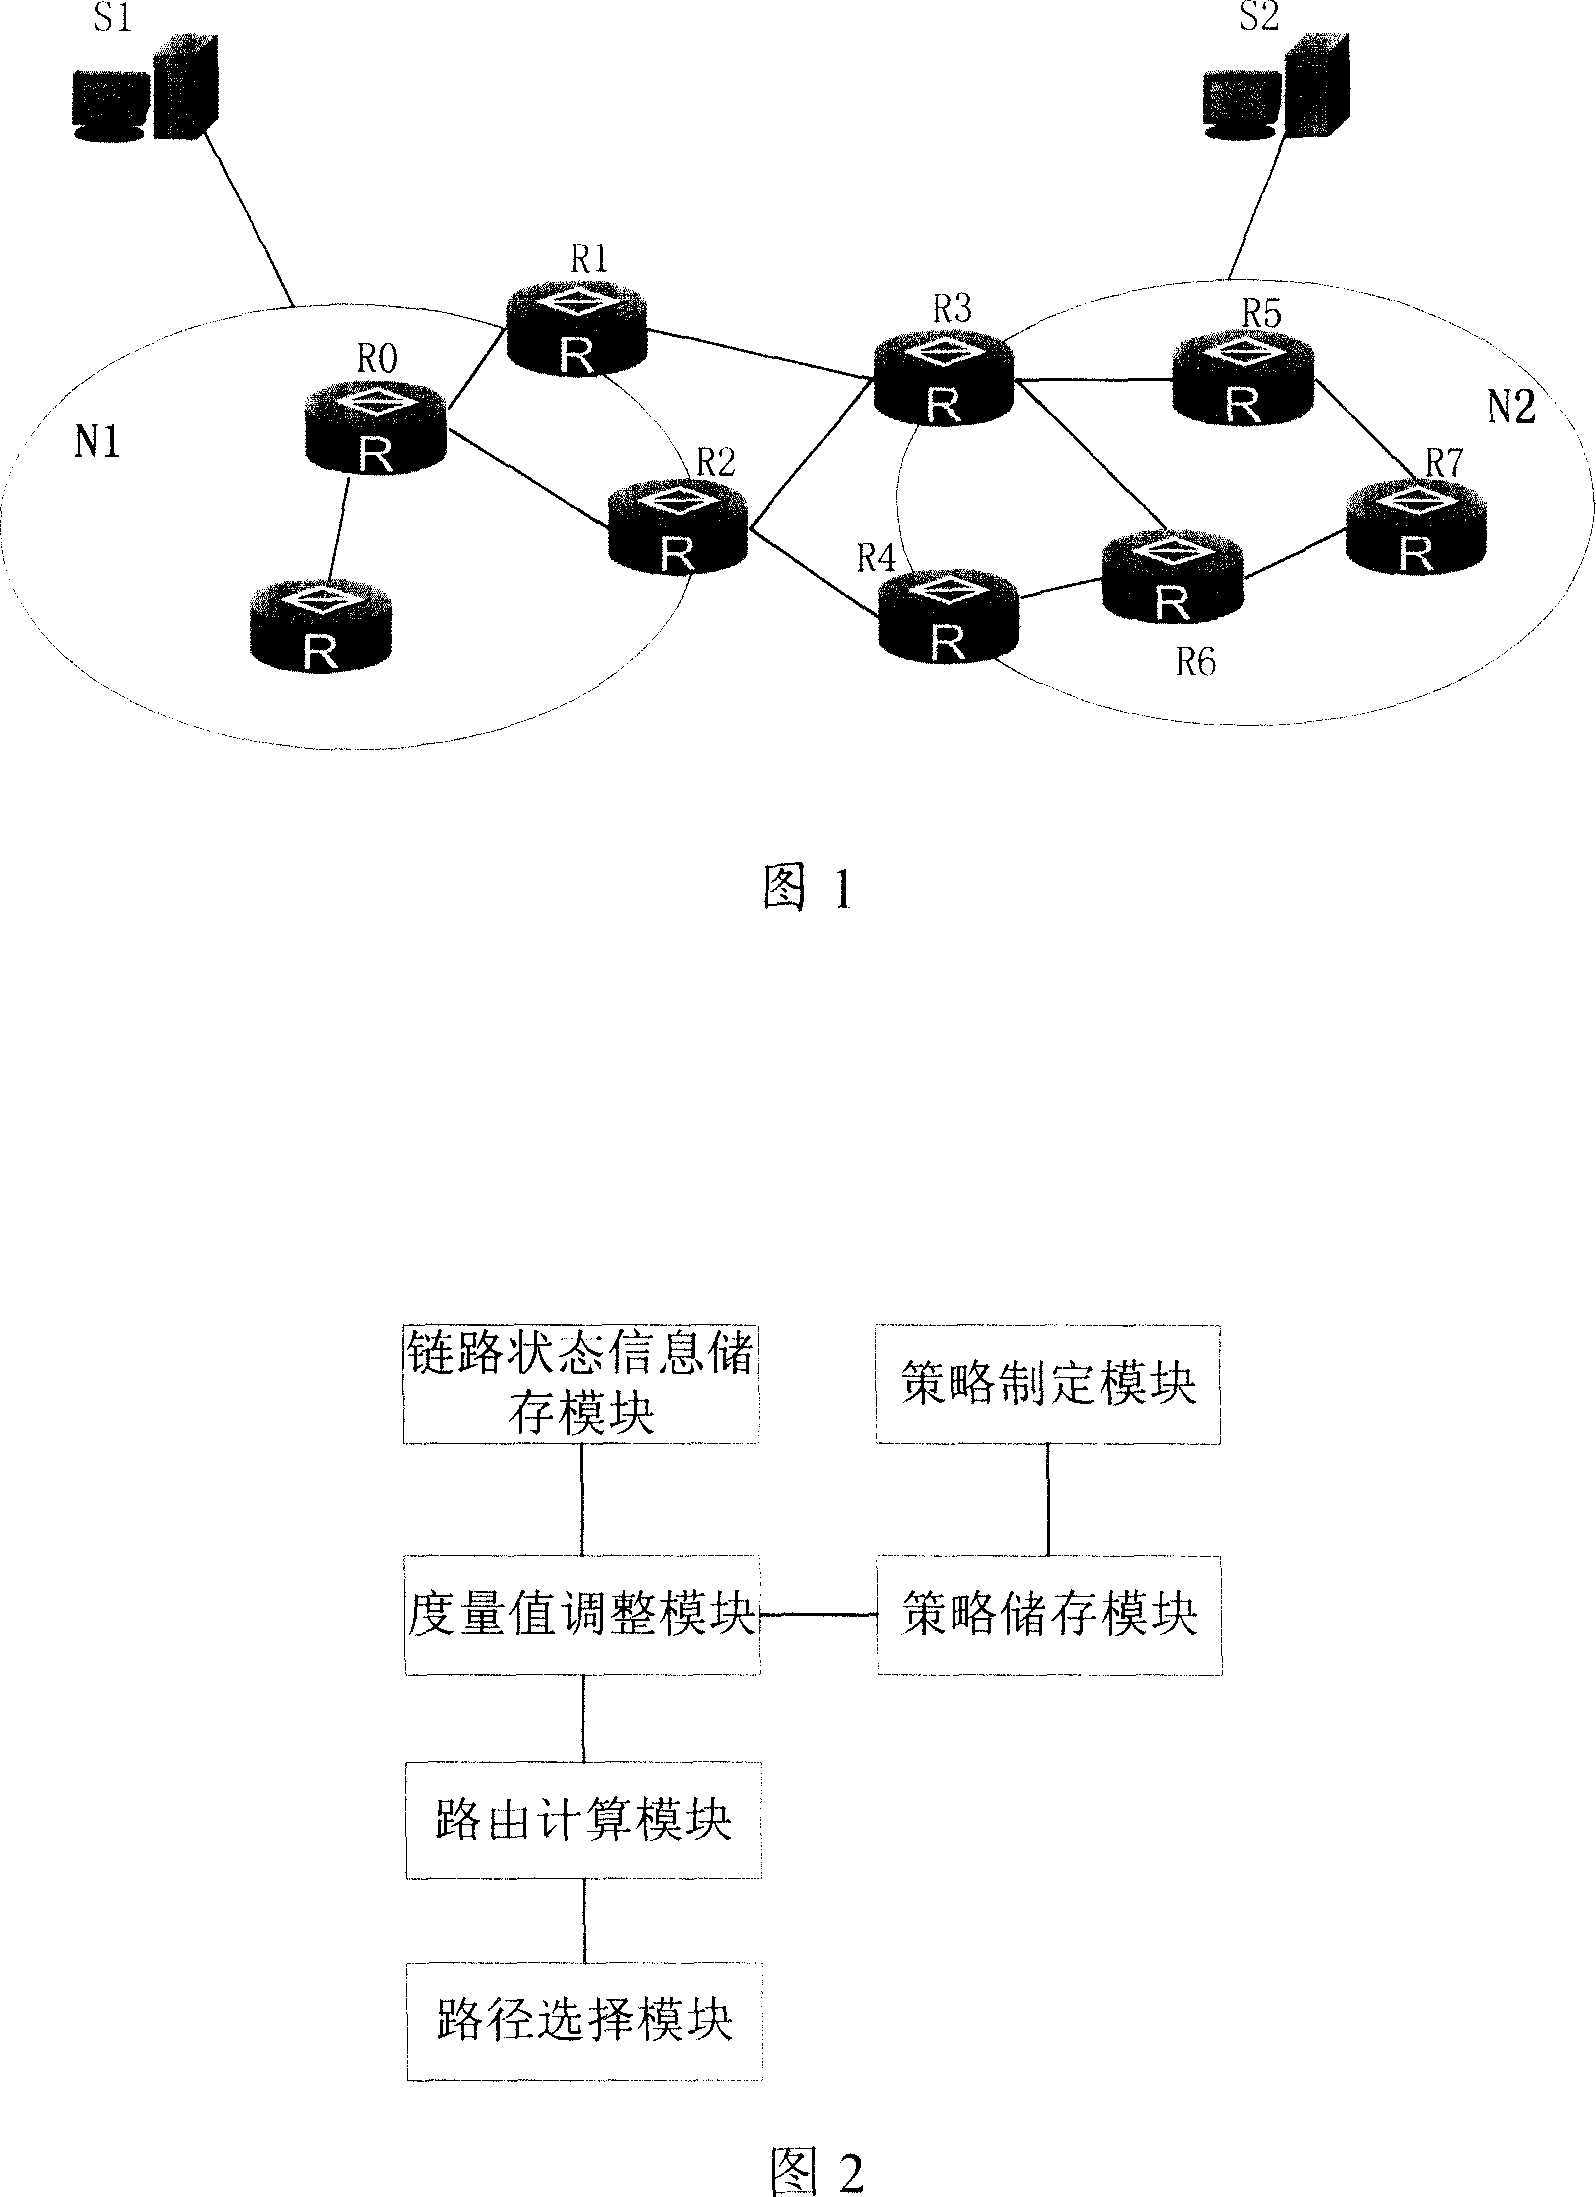 Route selection method and device